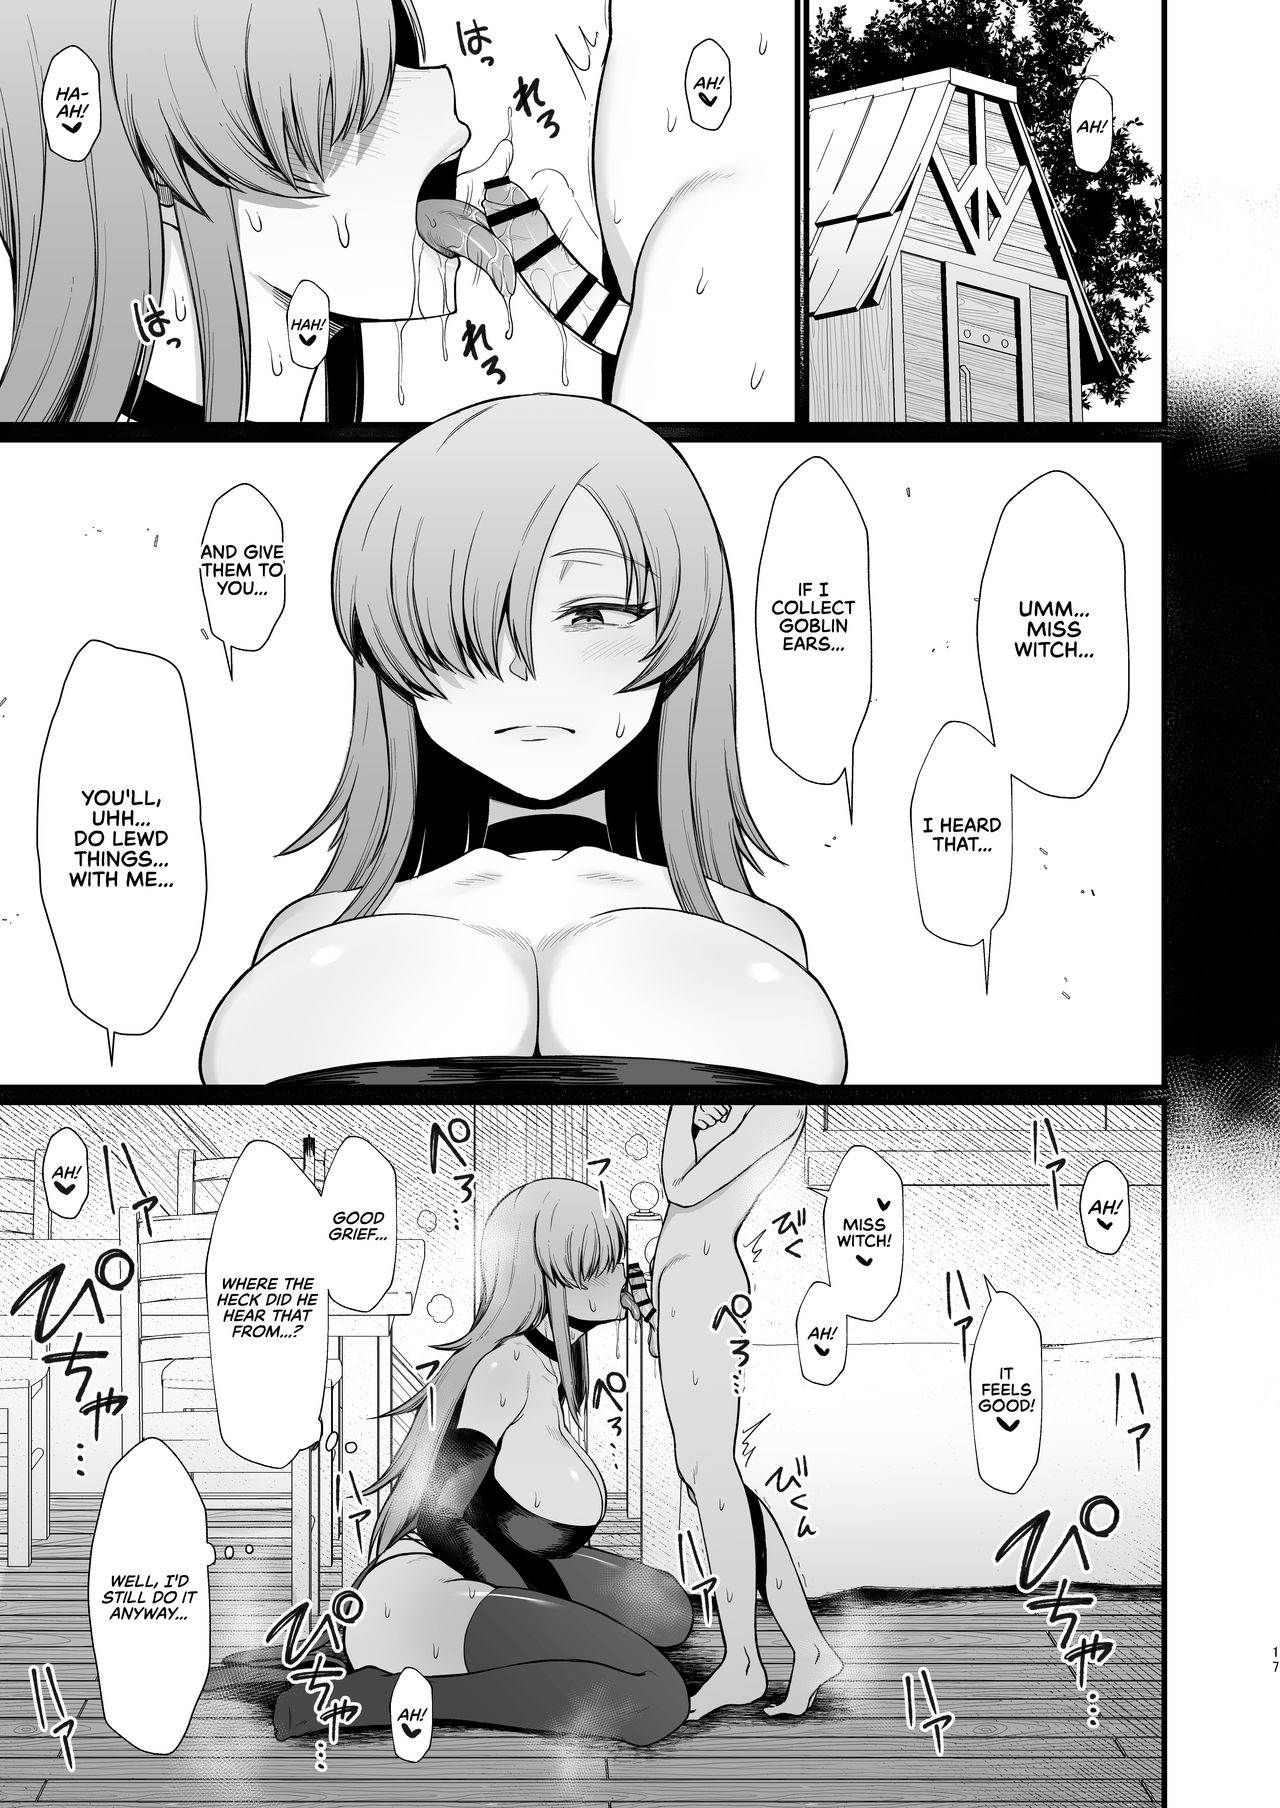 Shota Anal - Ravaged by a Shota in Another World [Butachang] Porn Comic - AllPornComic